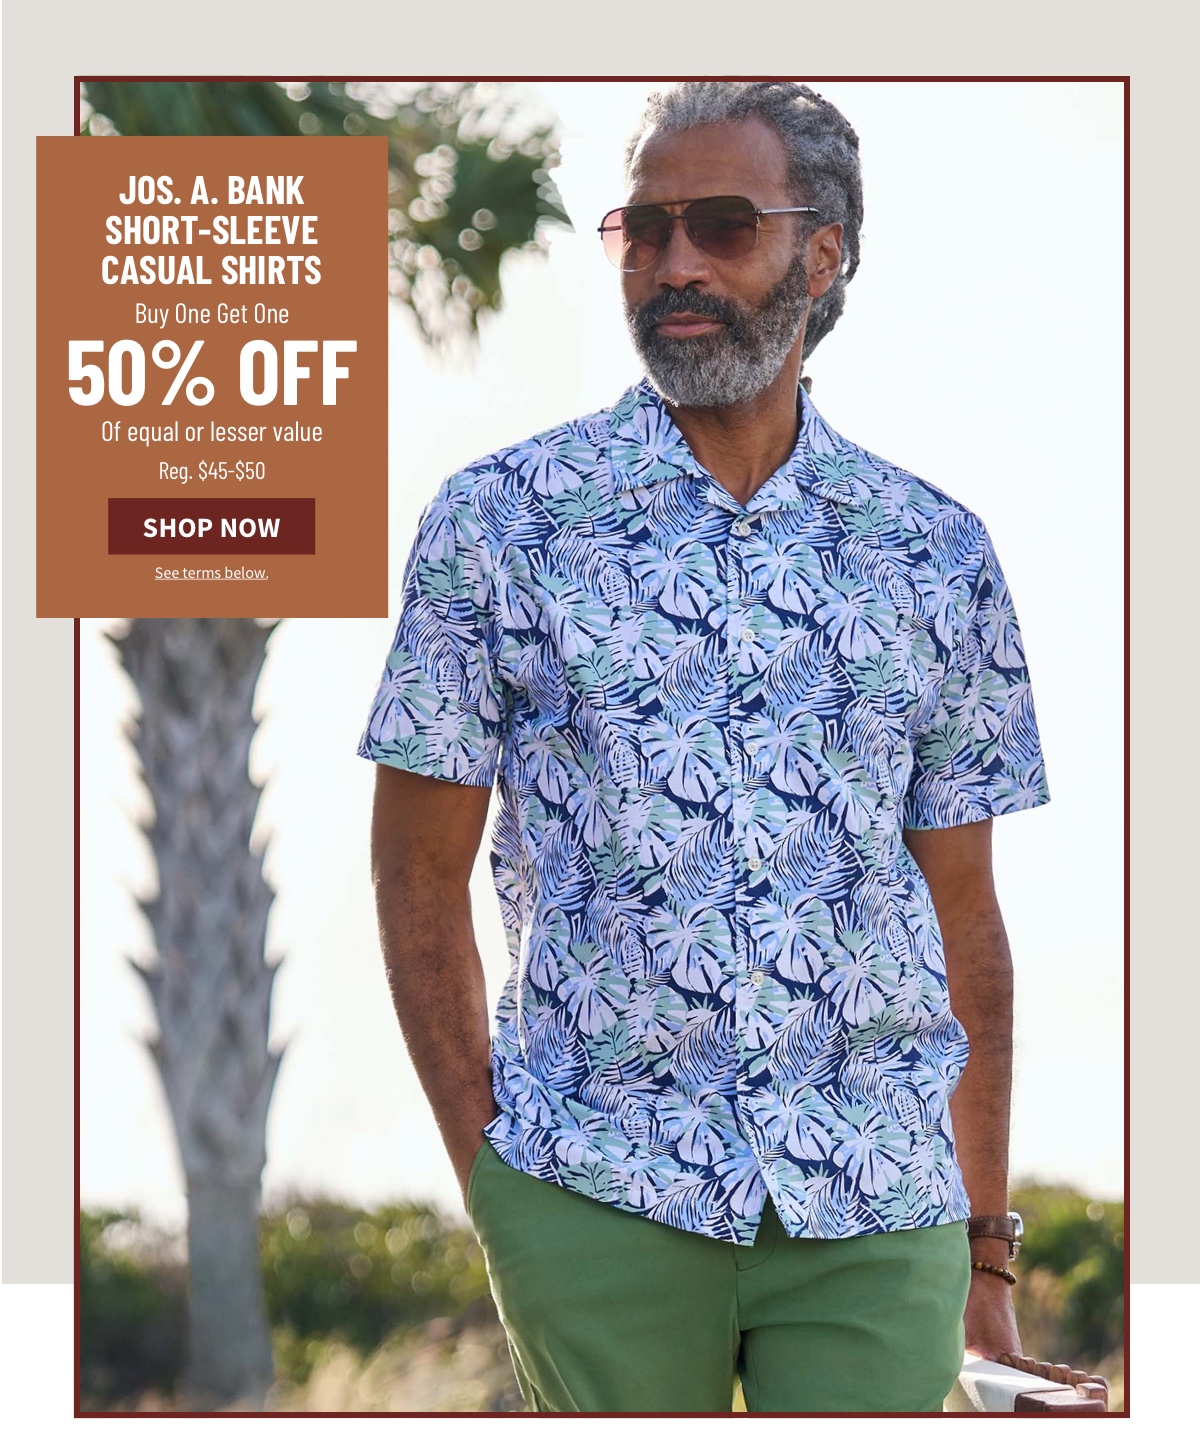 Jos. A. Bank Short-Sleeve Casual Shirts Buy One Get One 50% off Of equal or lesser value. Shop Now. Reg. $45-$50. See terms below.